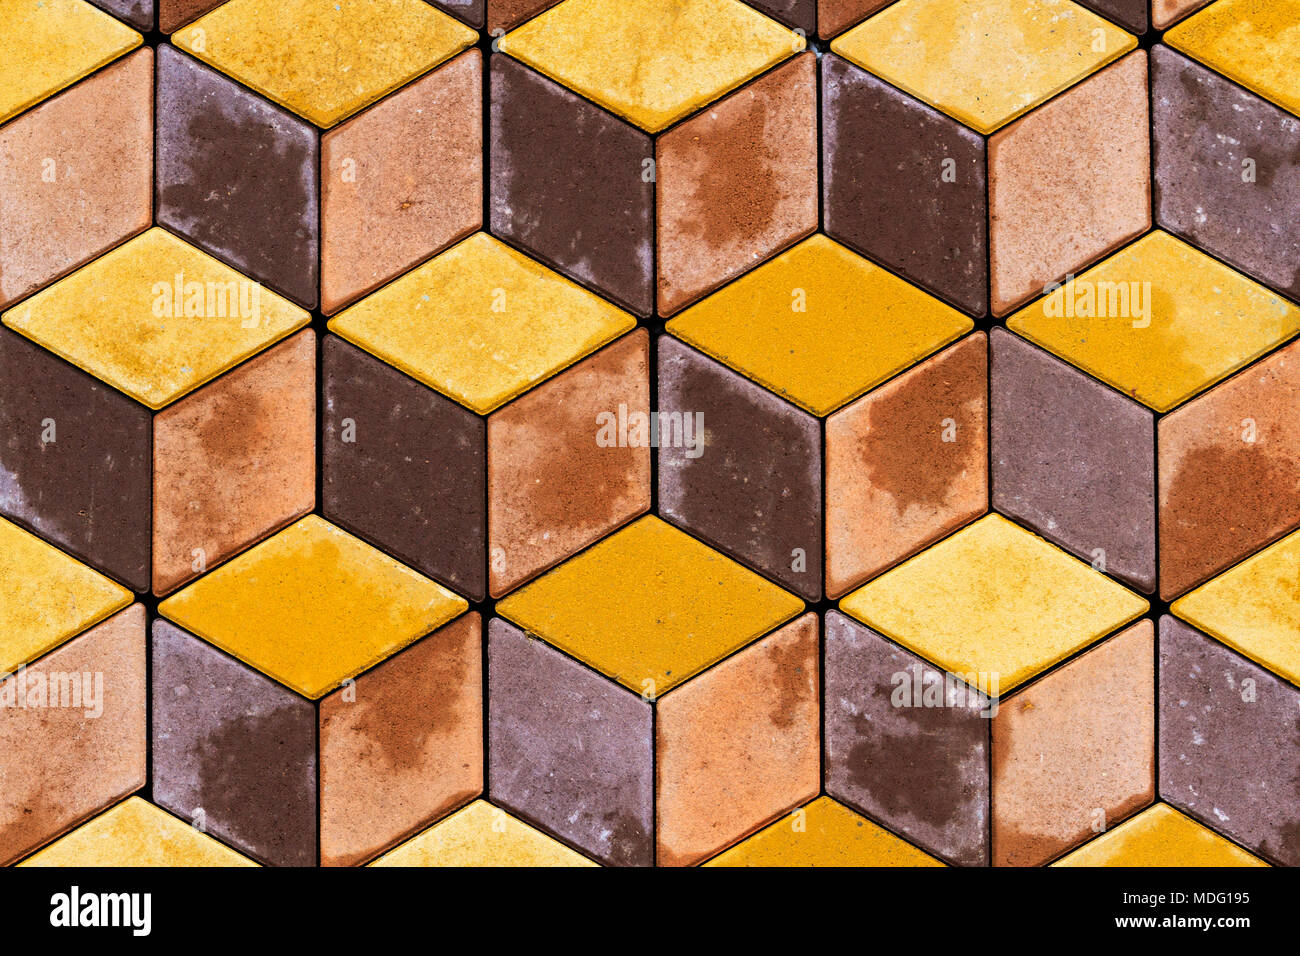 texture of diamonds paving tile, construction, design and style Stock Photo